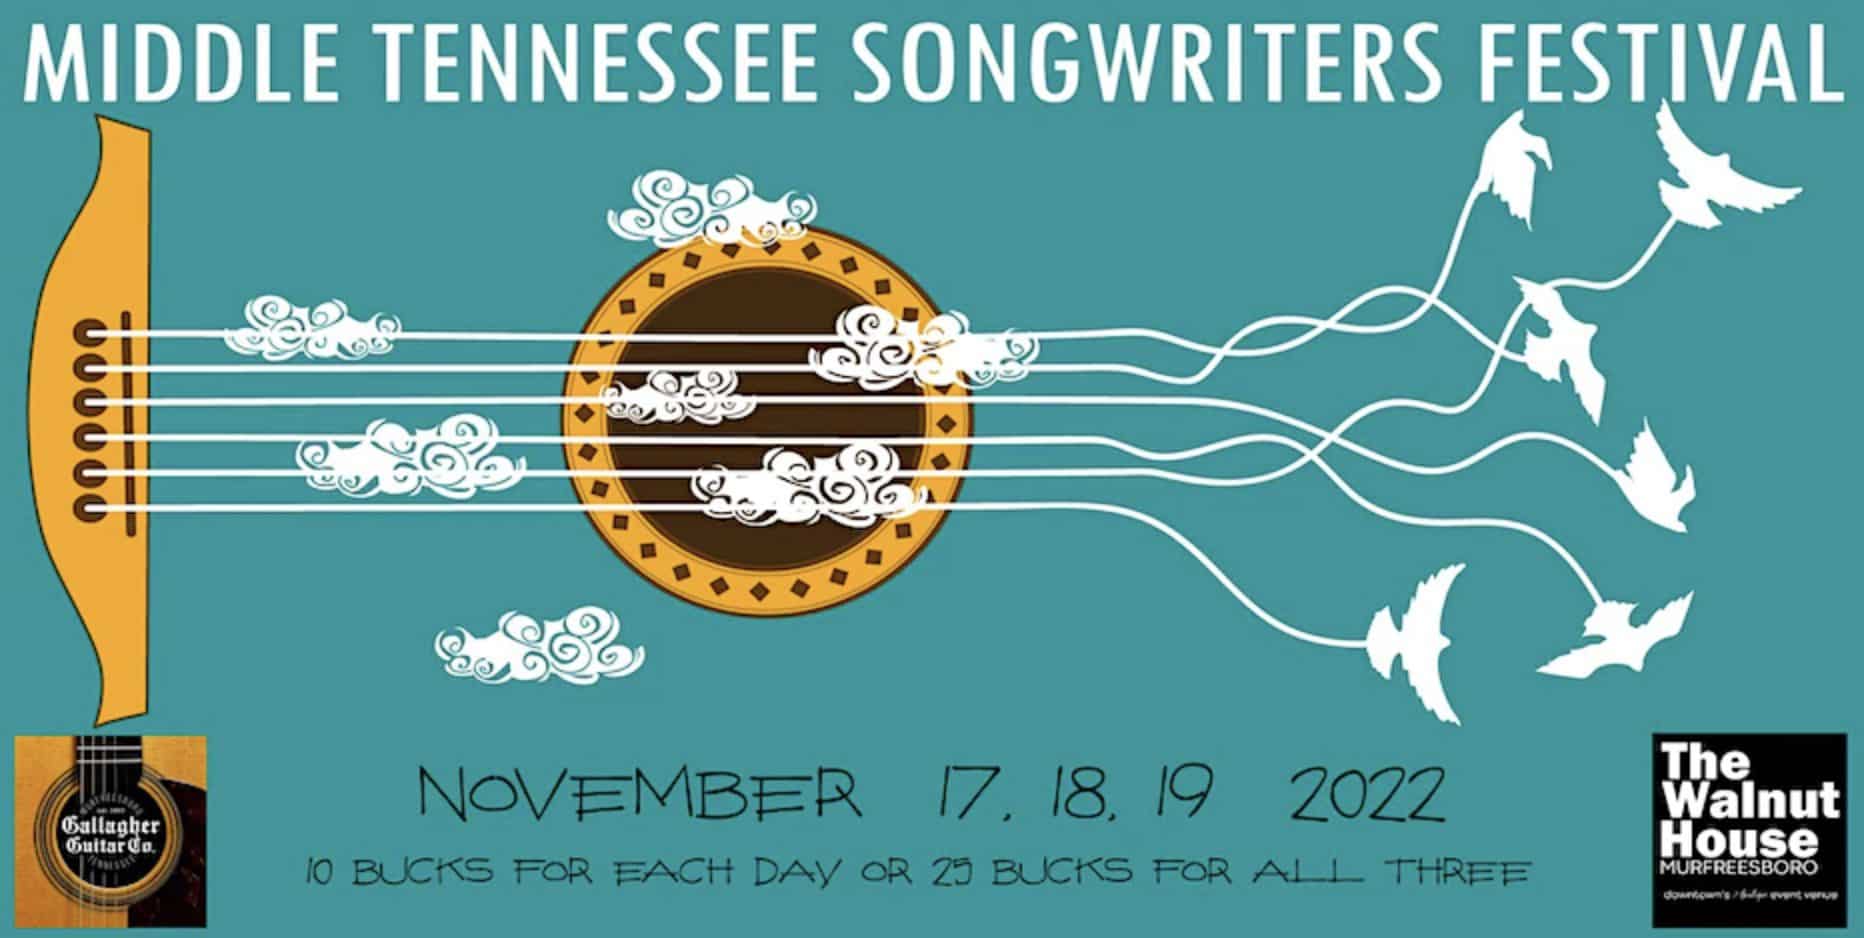 Middle Tennessee Songwriters Festival is a Murfreesboro, TN event by Walnut House, Gallagher Unplugged, and Gallagher Guitars.